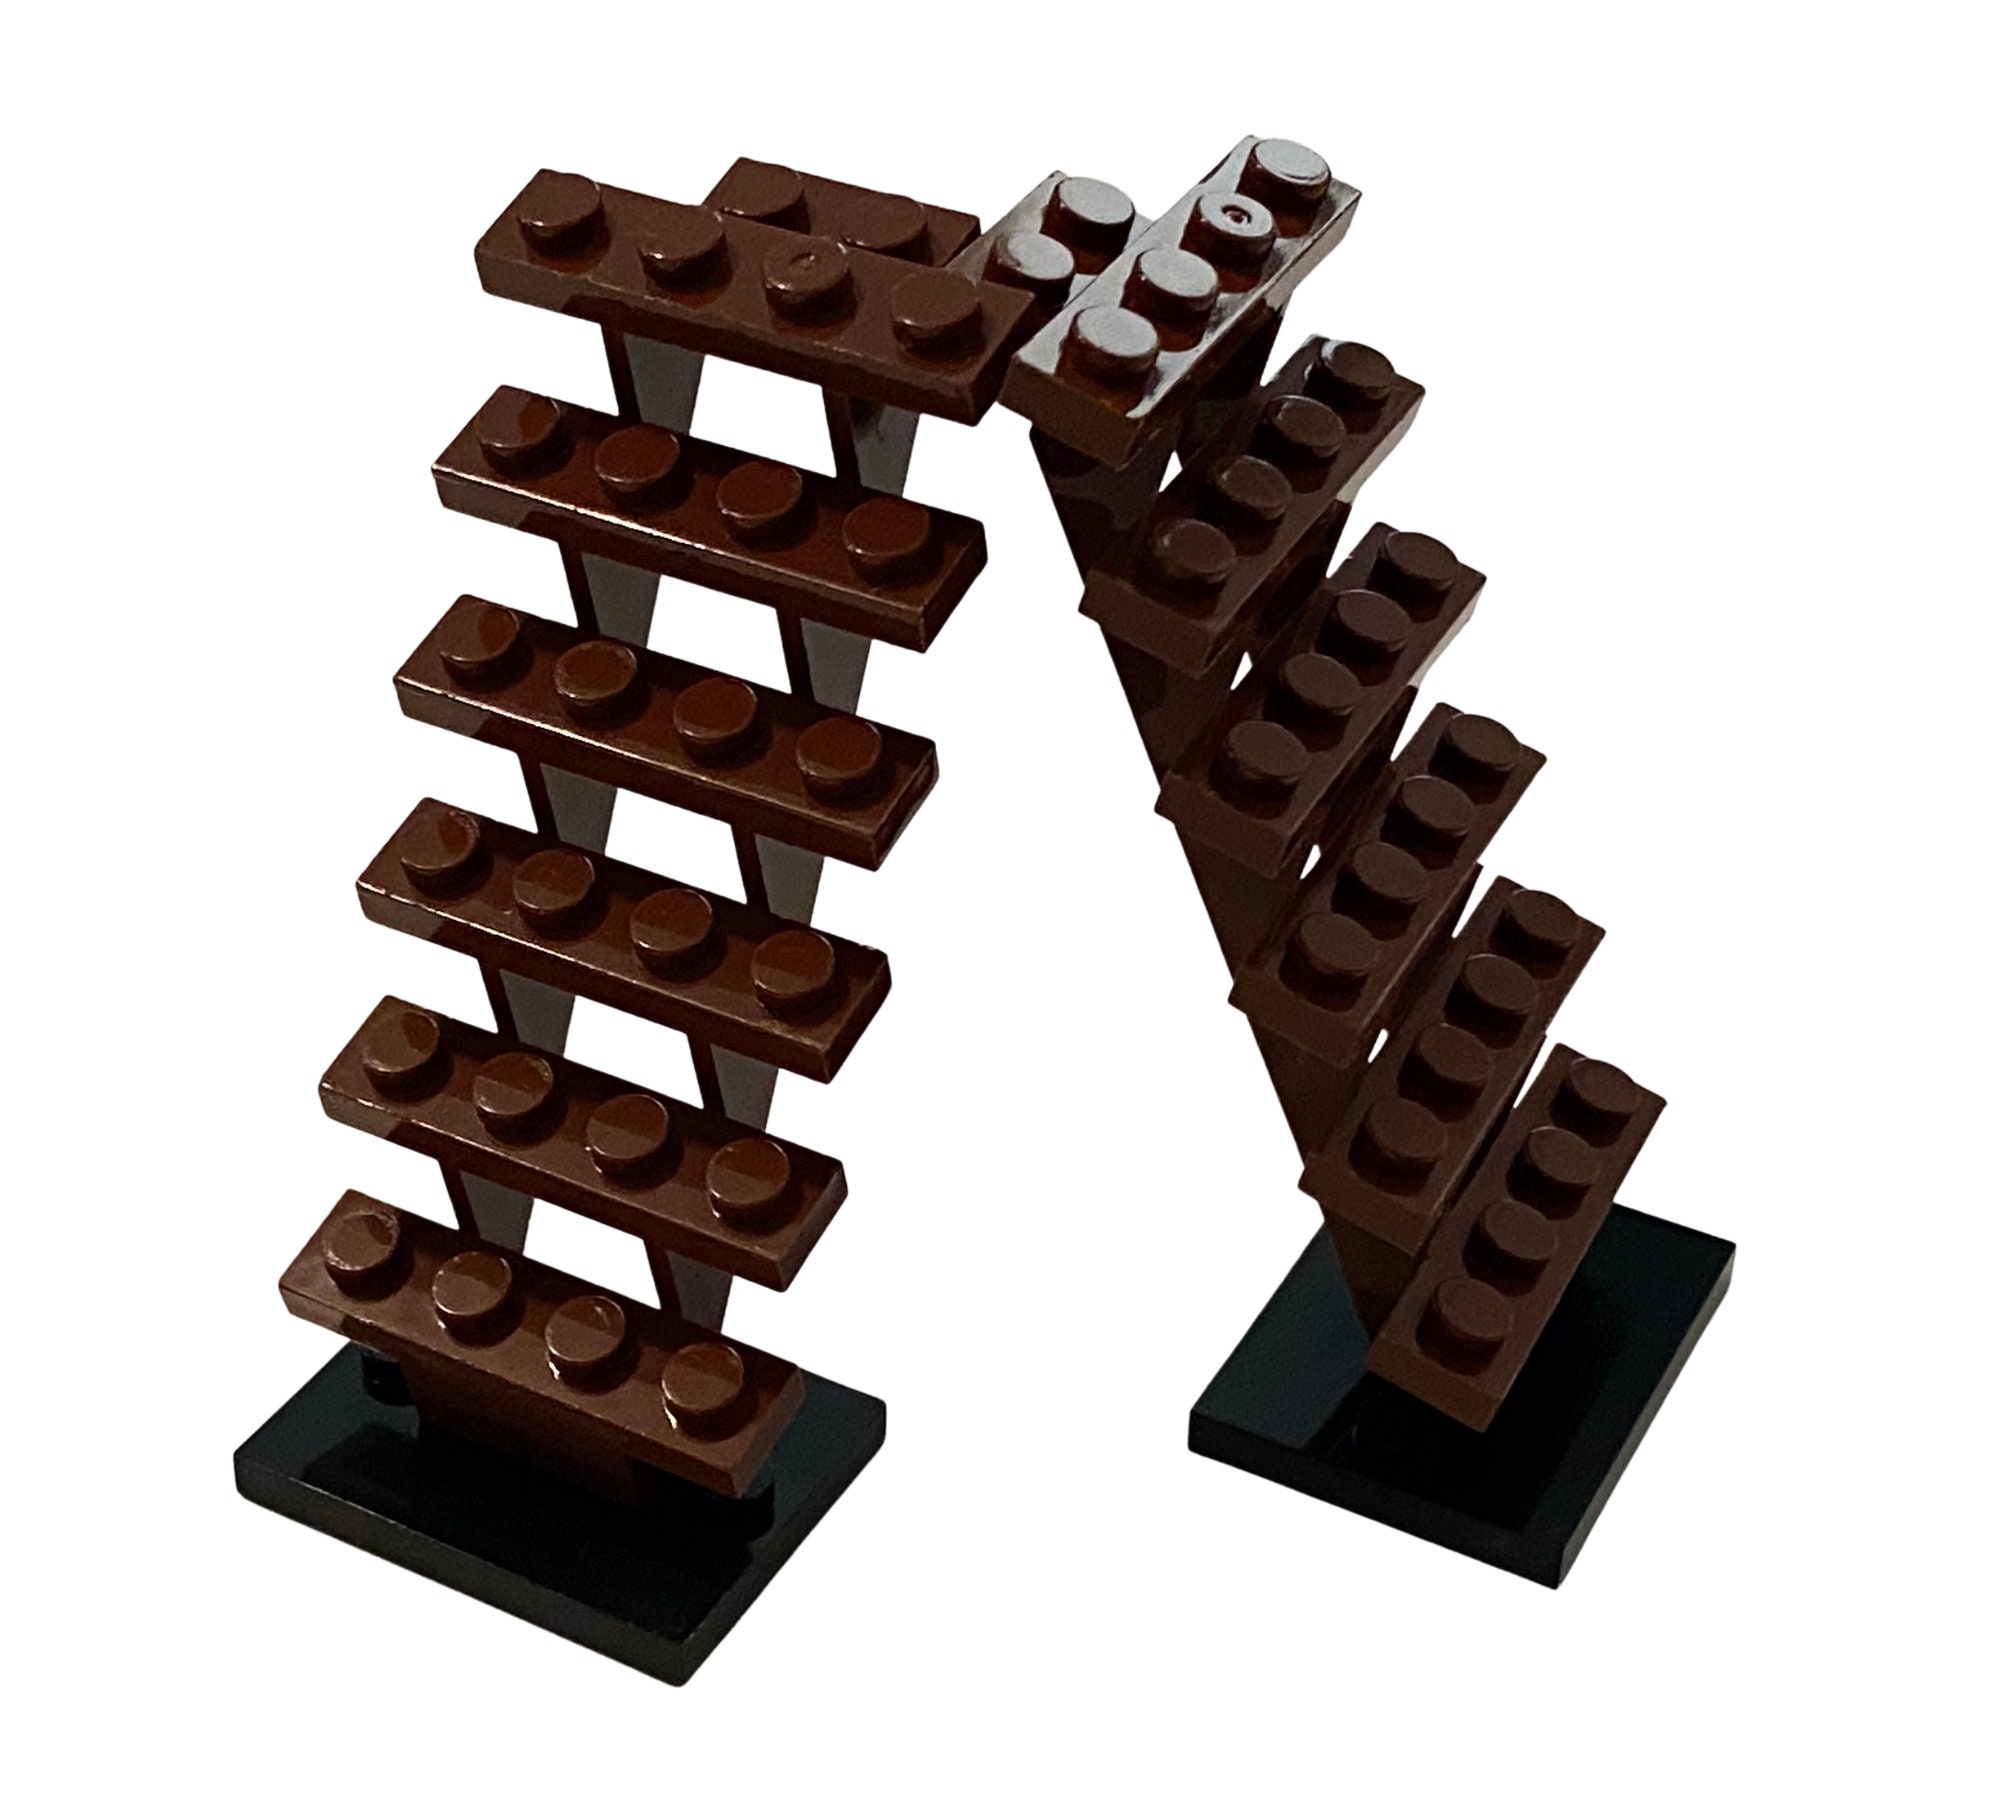 Munk Biskop Tulipaner 2pcs. Lego Stairs-lego Parts-play Toys-lego Accessories-lego - Etsy